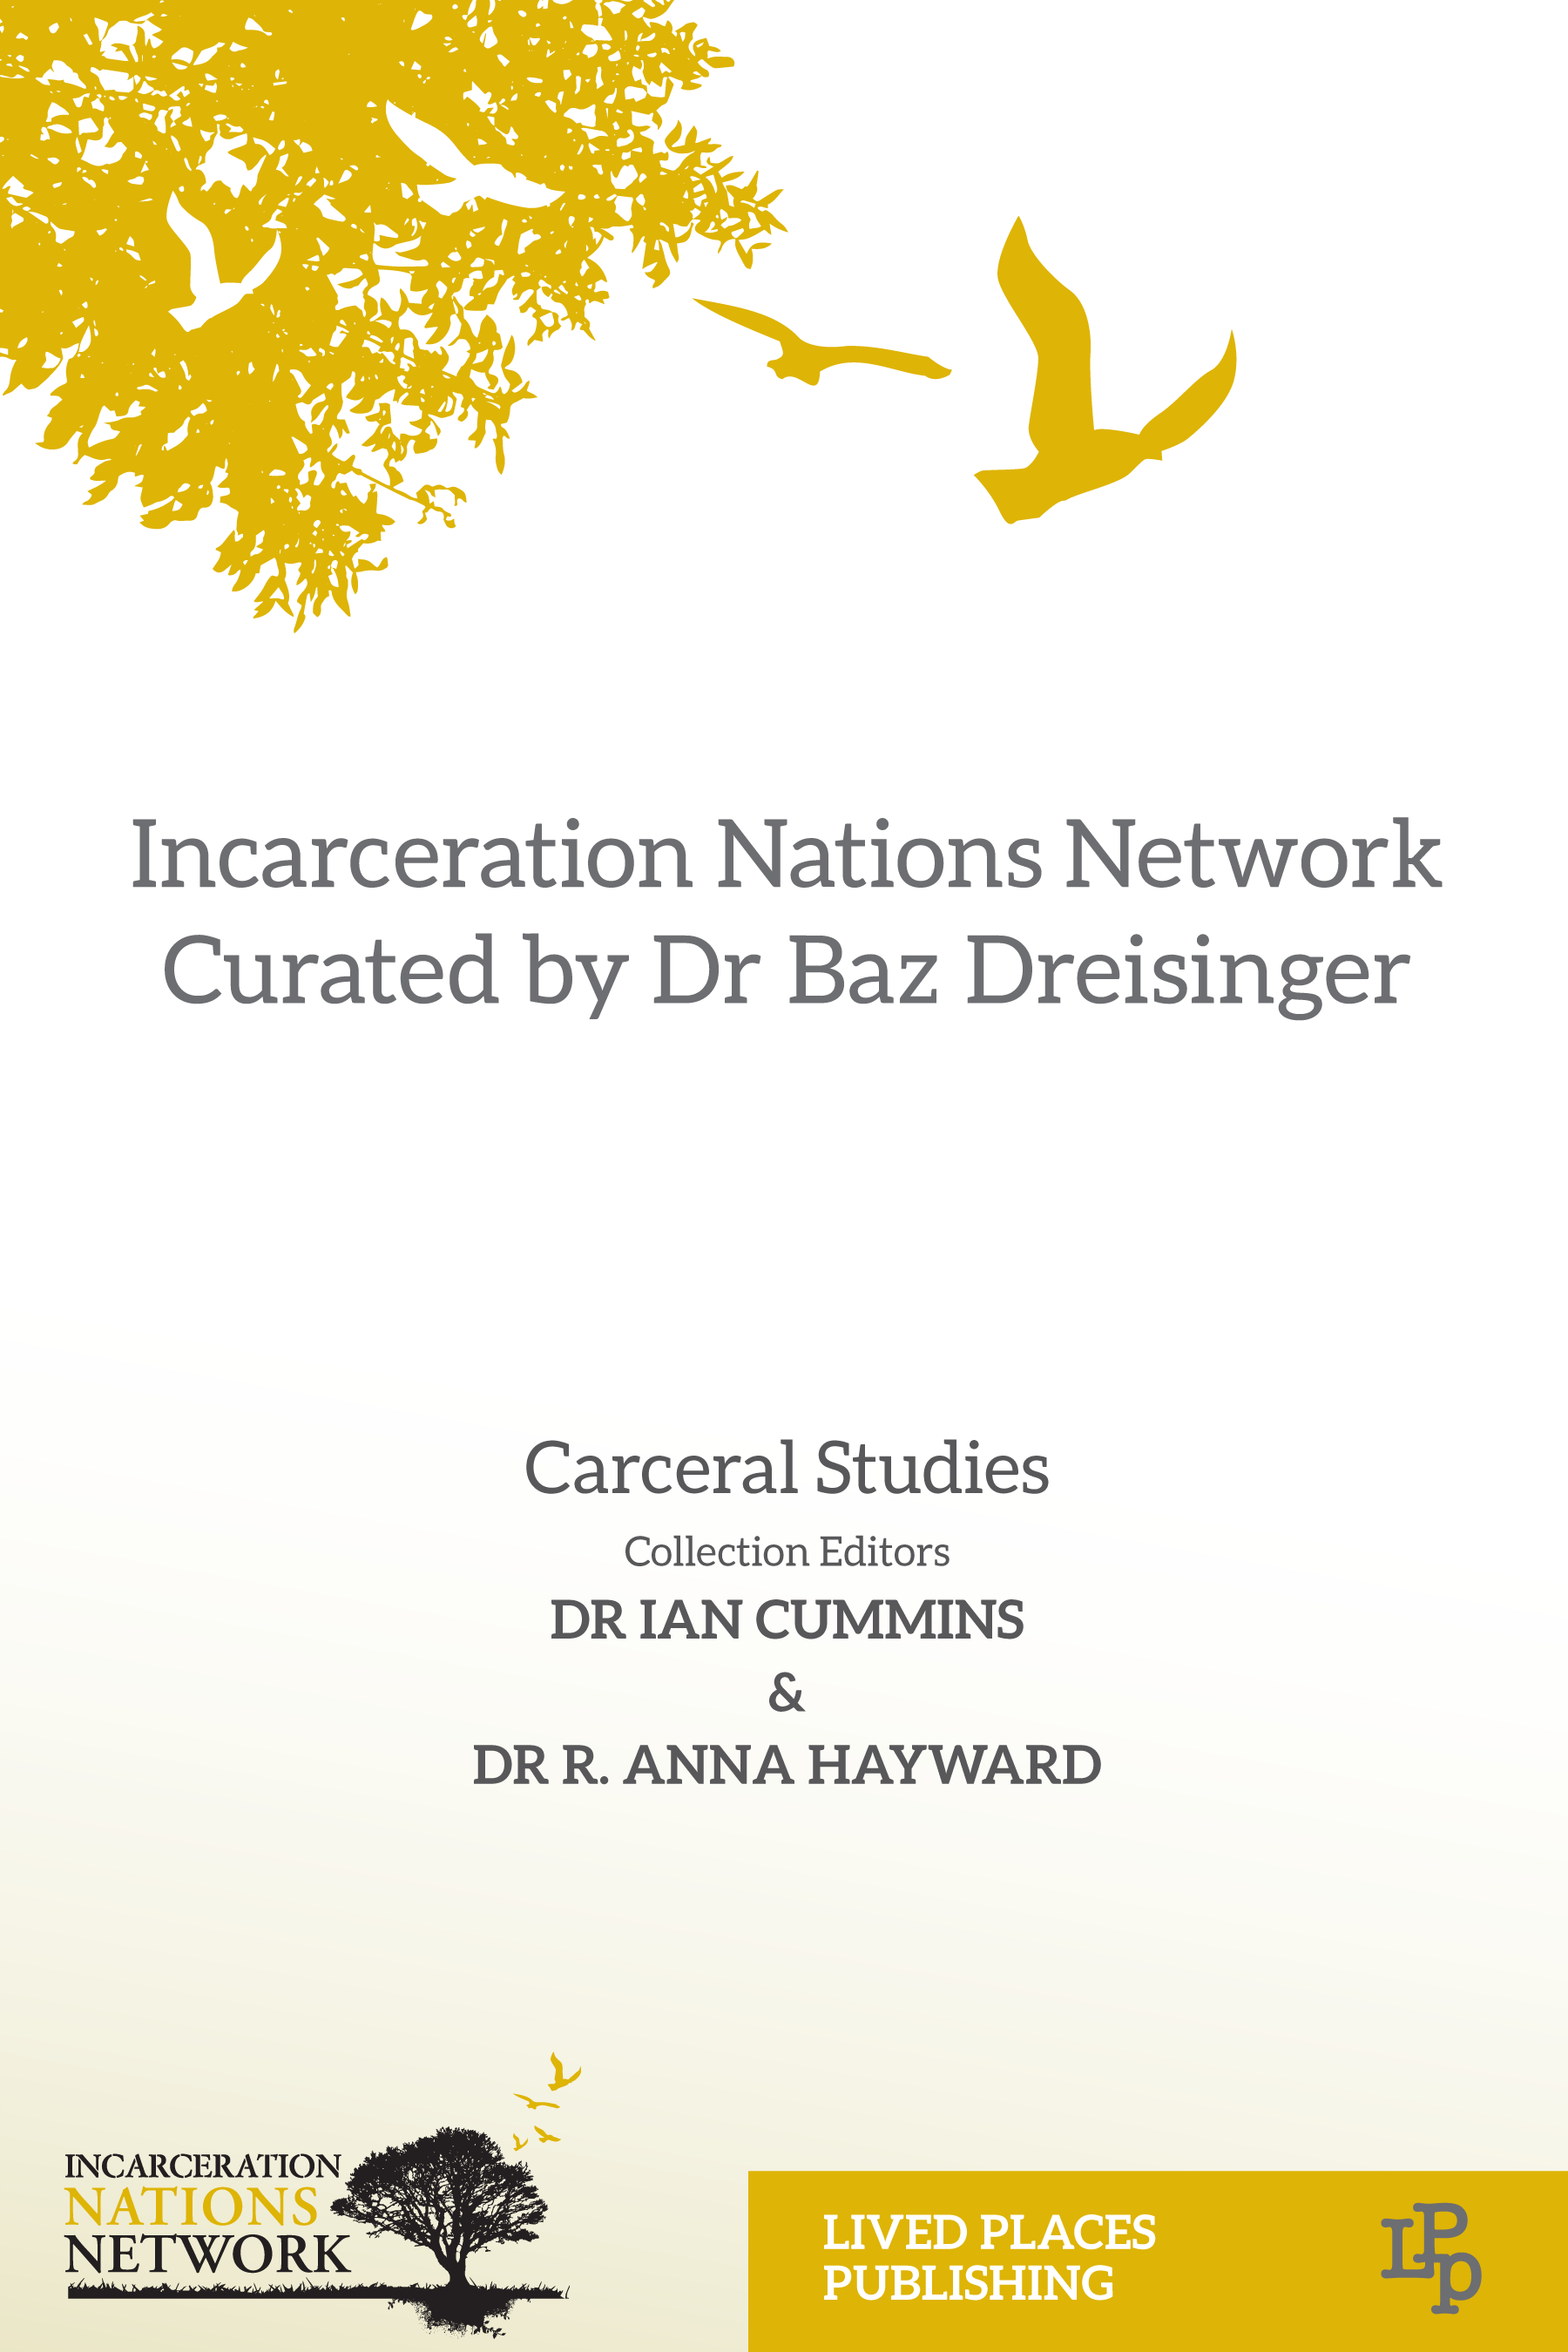 Incarceration Nations Network Collection book cover.